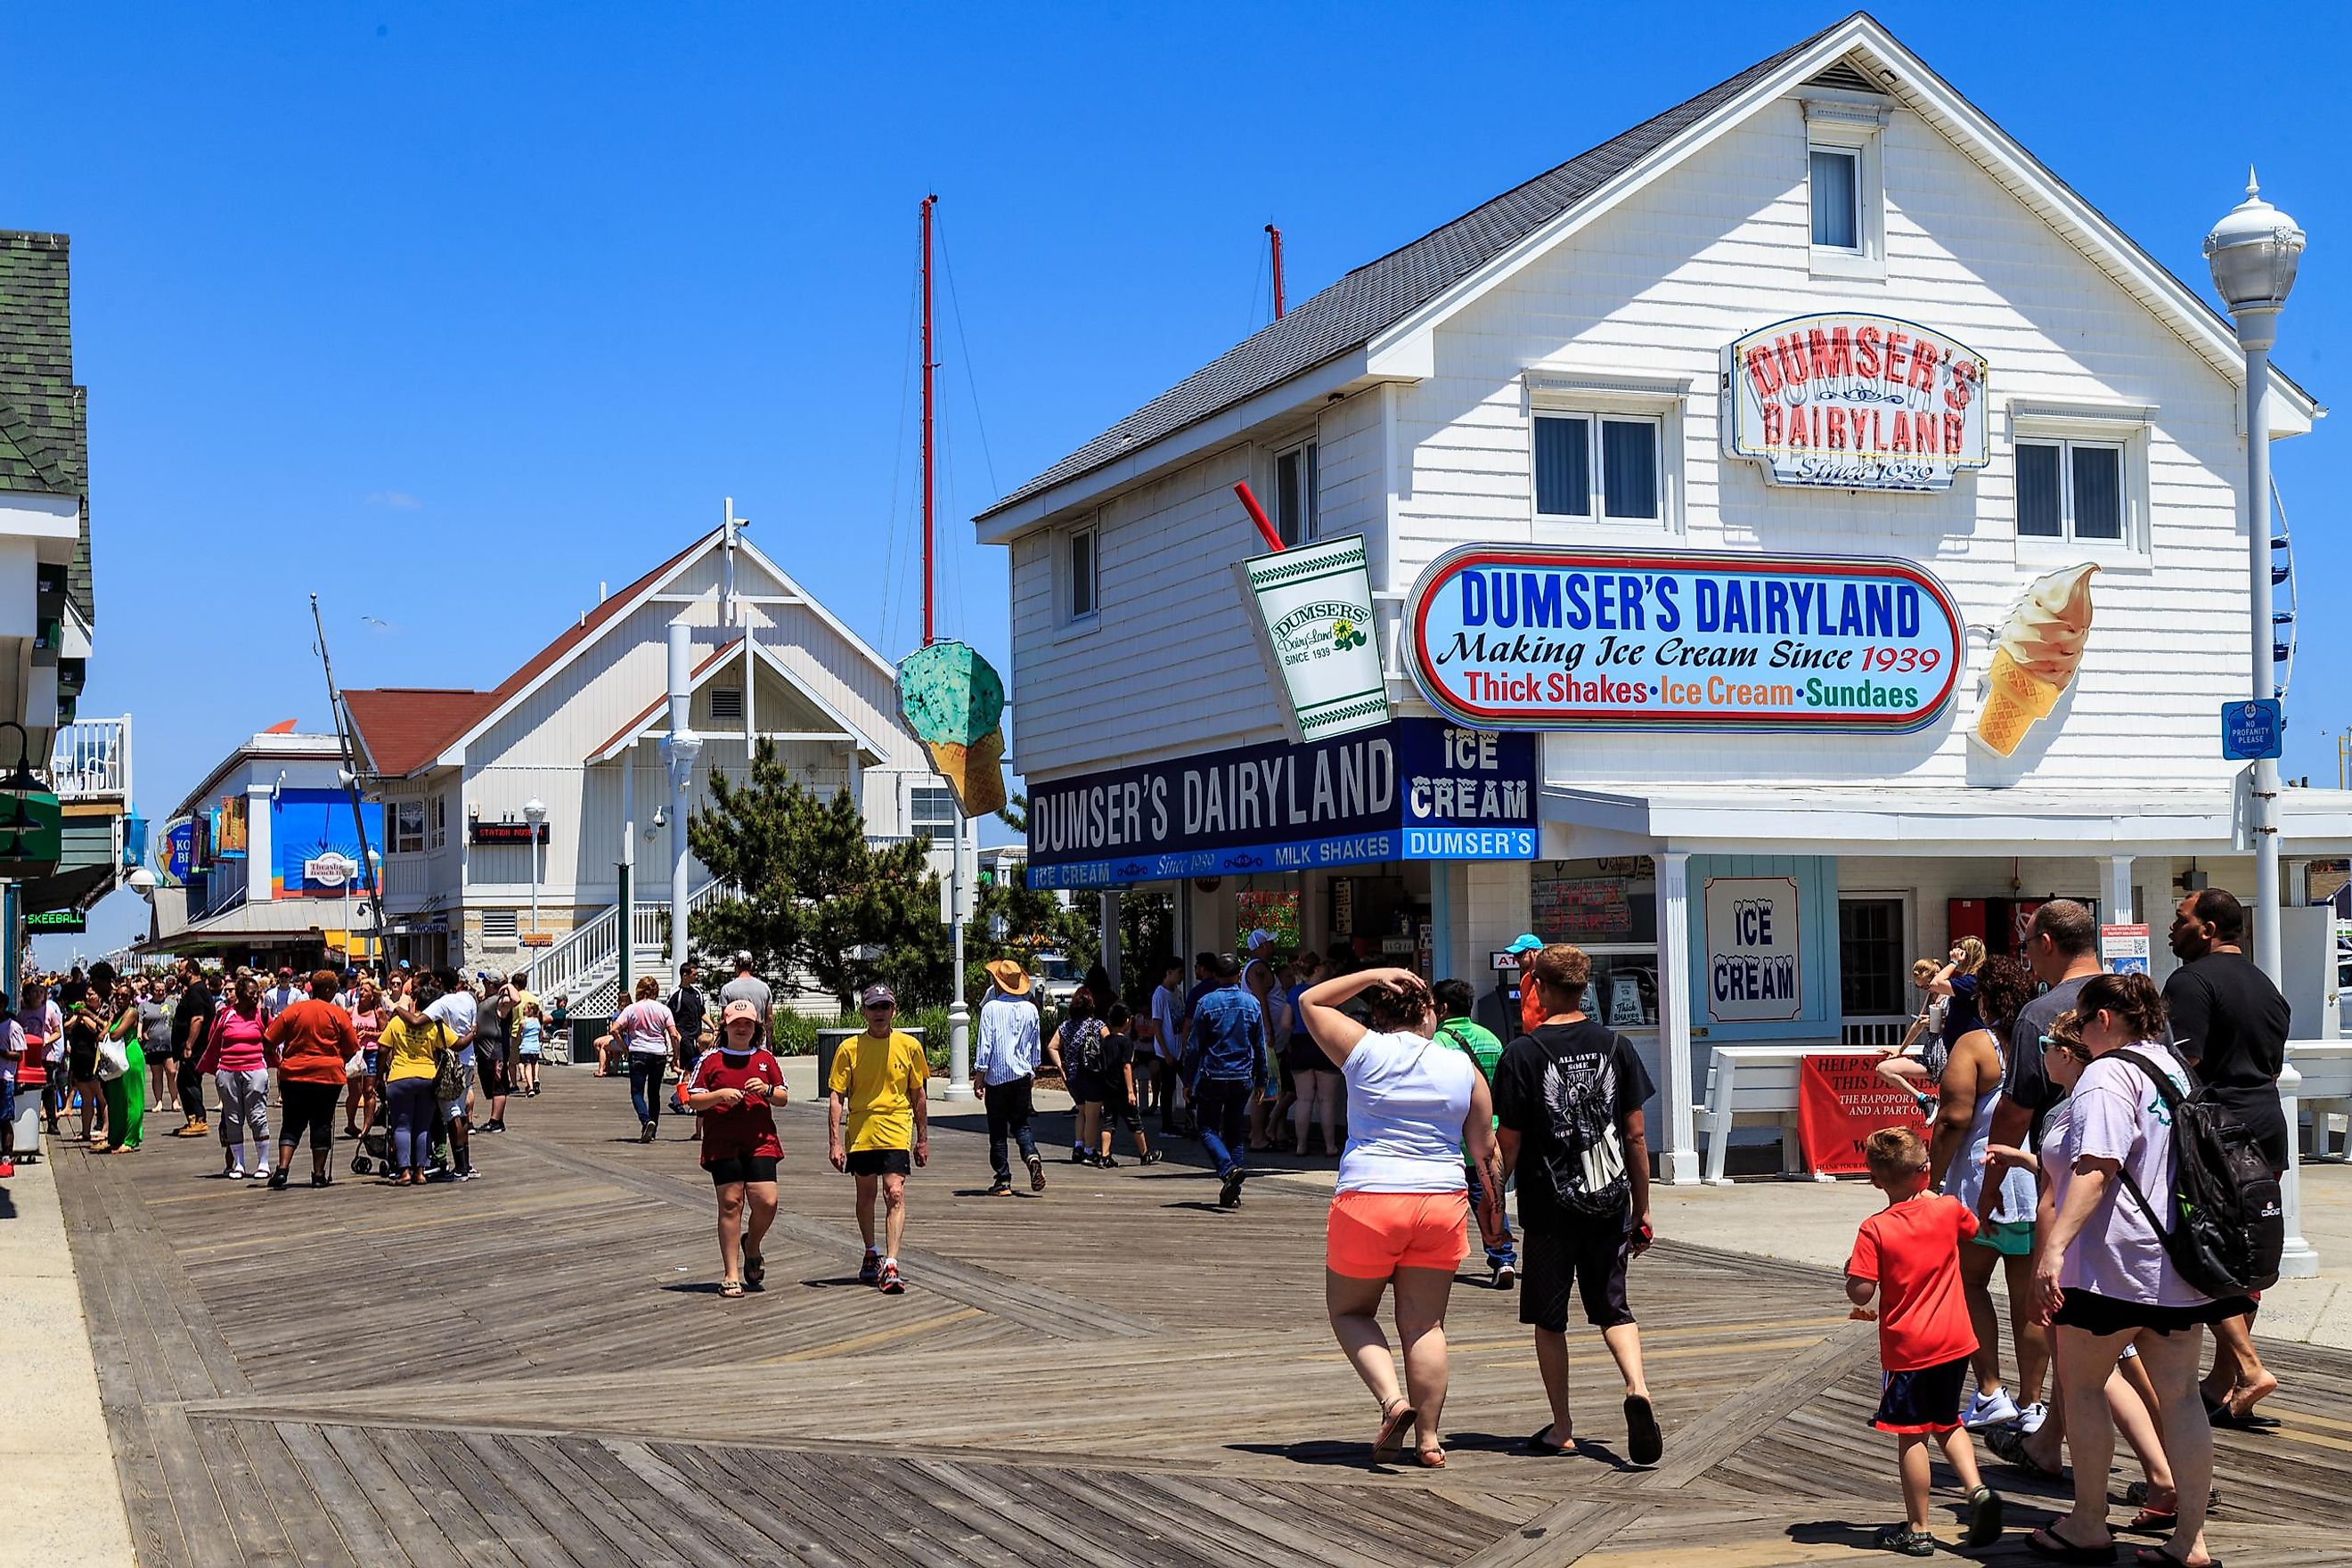 Stores, shops, and eateries attract visitors on the Ocean City boardwalk in Ocean City, Maryland, USA. Editorial credit: George Sheldon / Shutterstock.com